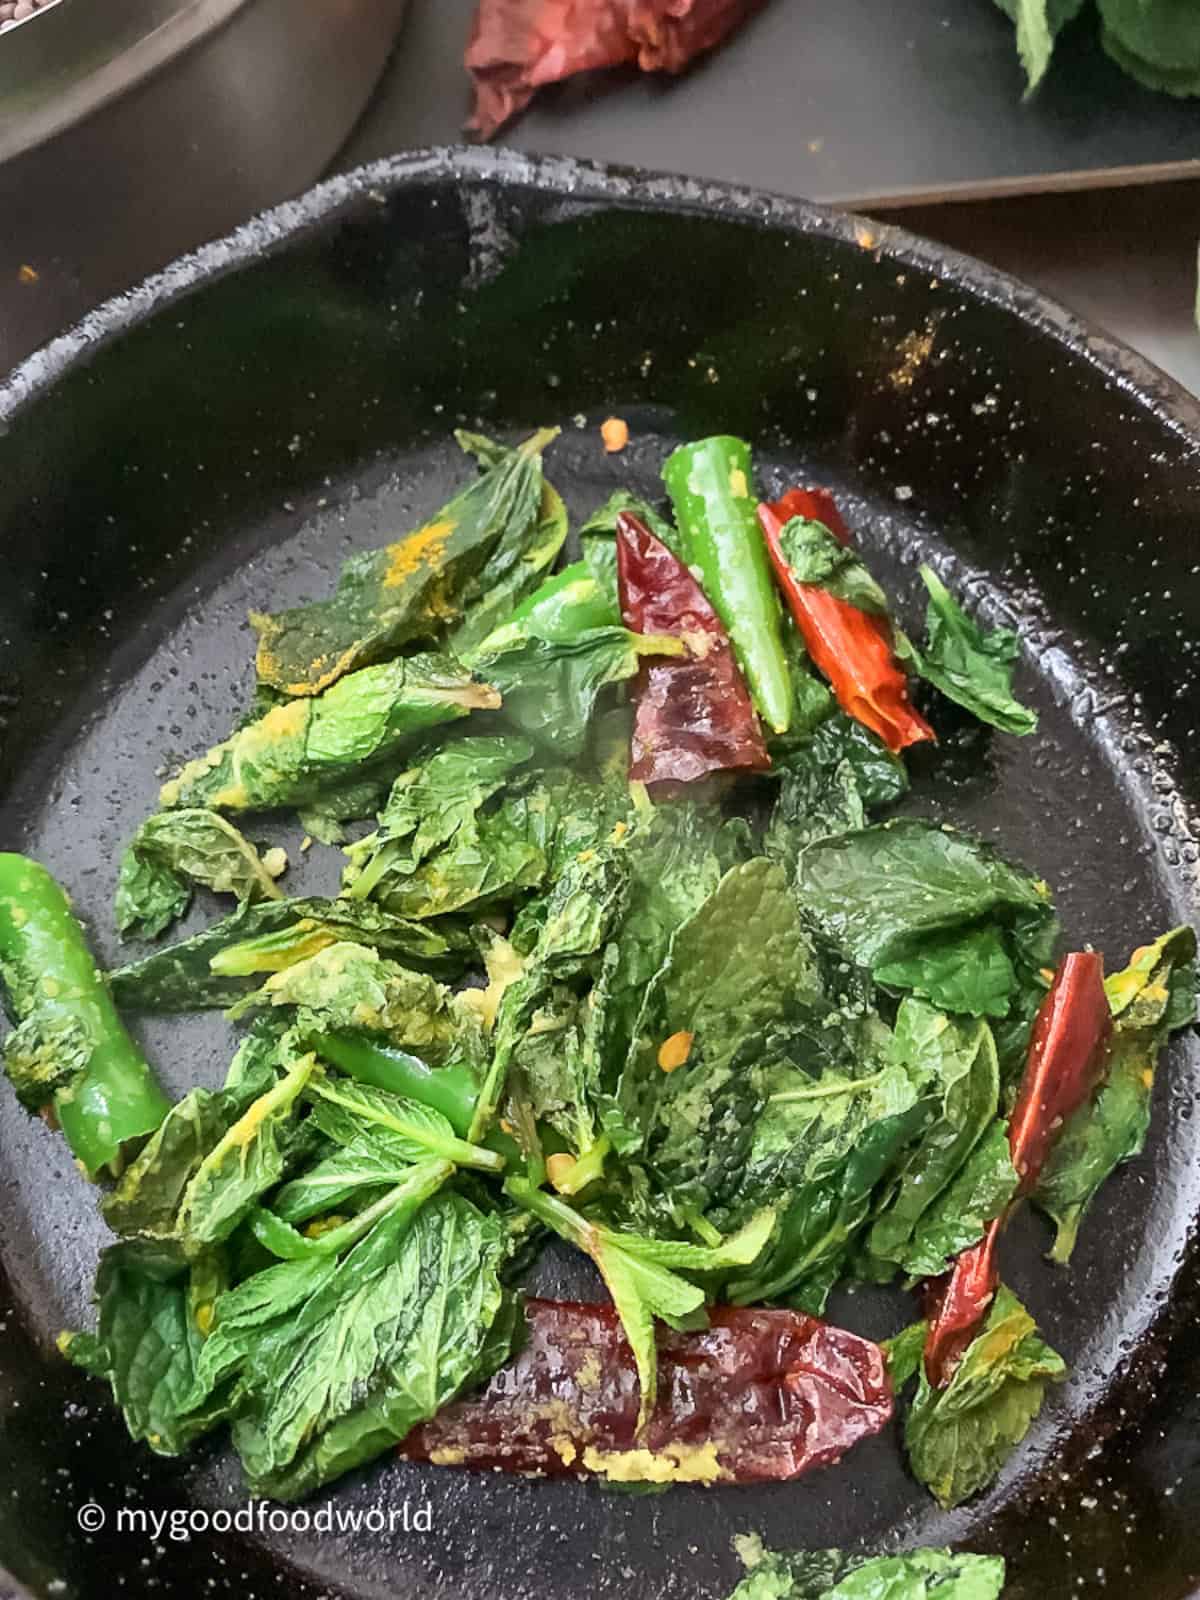 Mint leaves, chilies, and spices fried in oil for chutney.